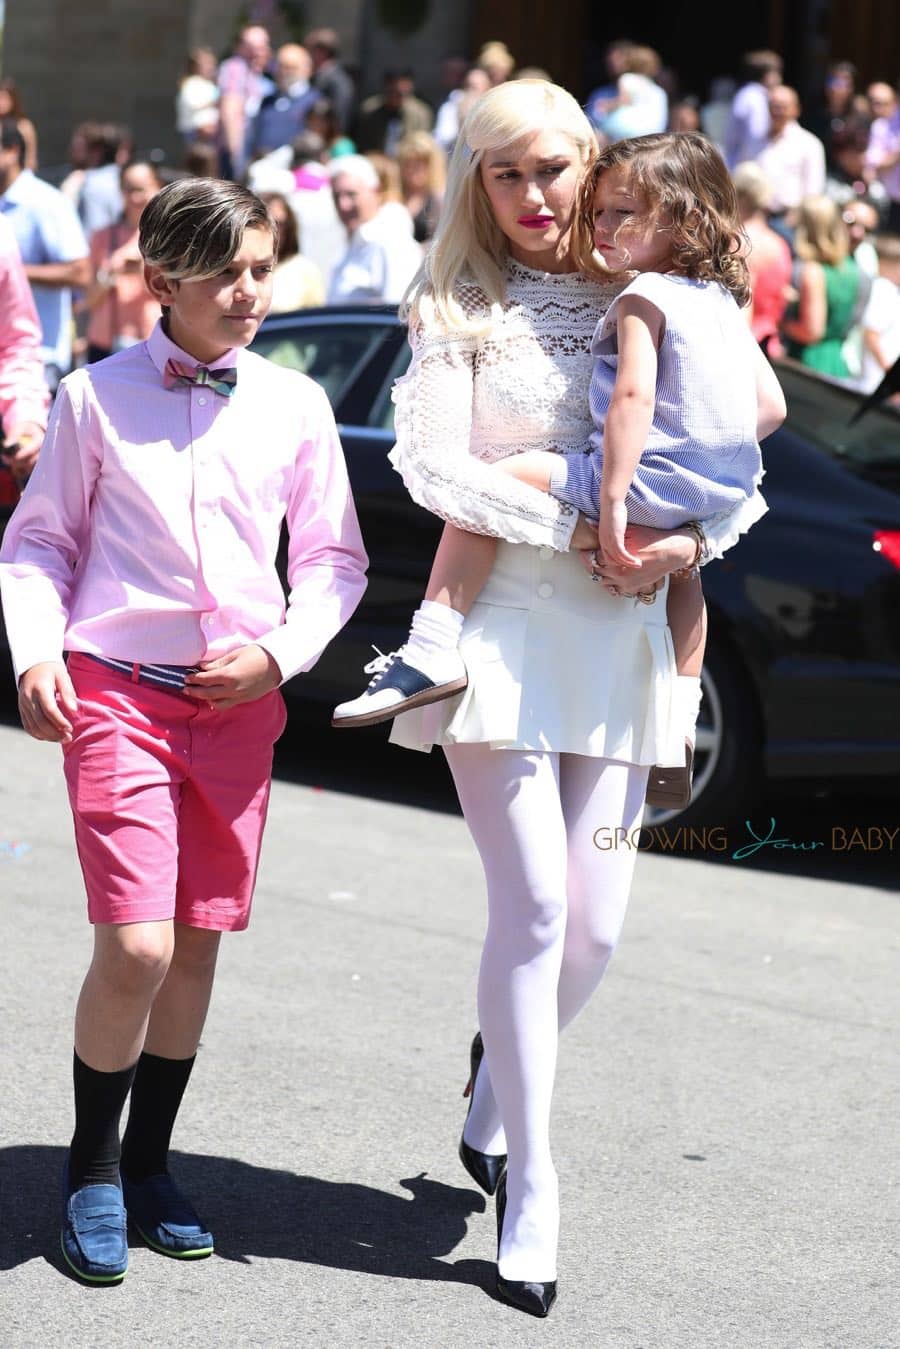 Gwen Stefani leaves Sunday Service with her sons Apollo and Kingston Rossdale